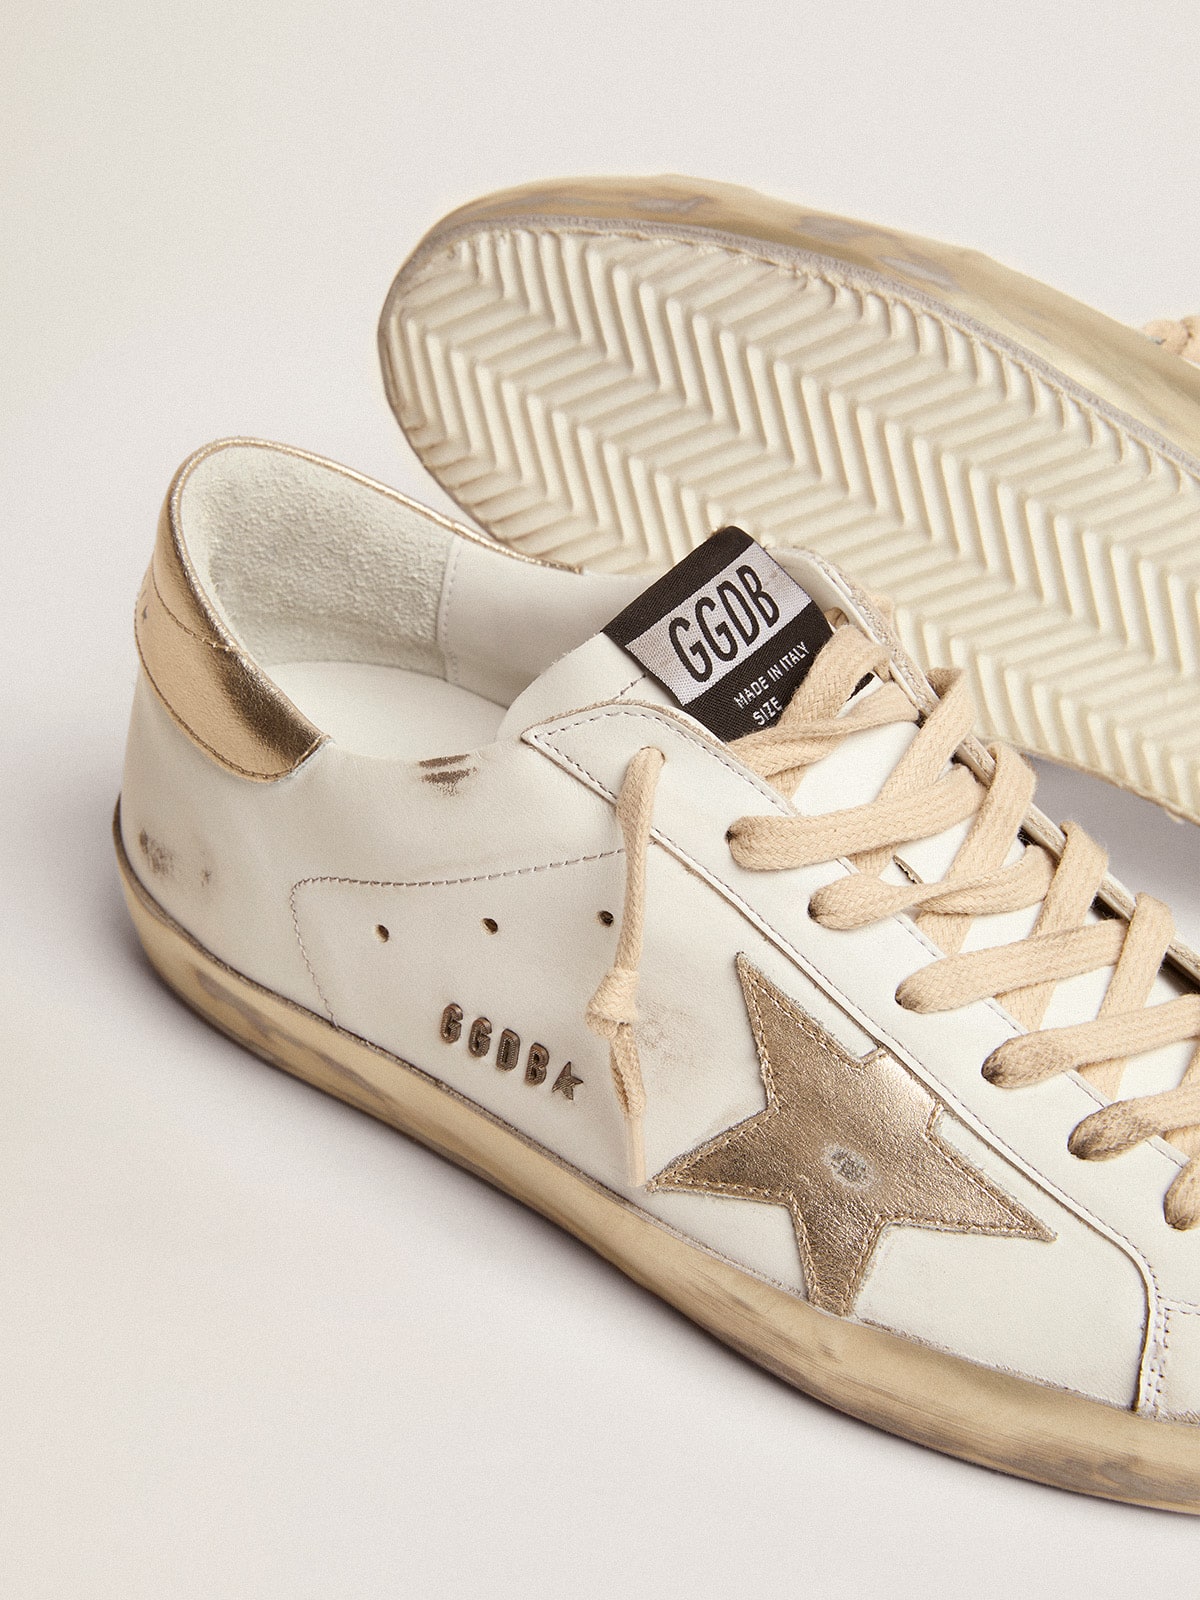 Men's Super-Star with gold sparkle foxing and lettering | Golden Goose